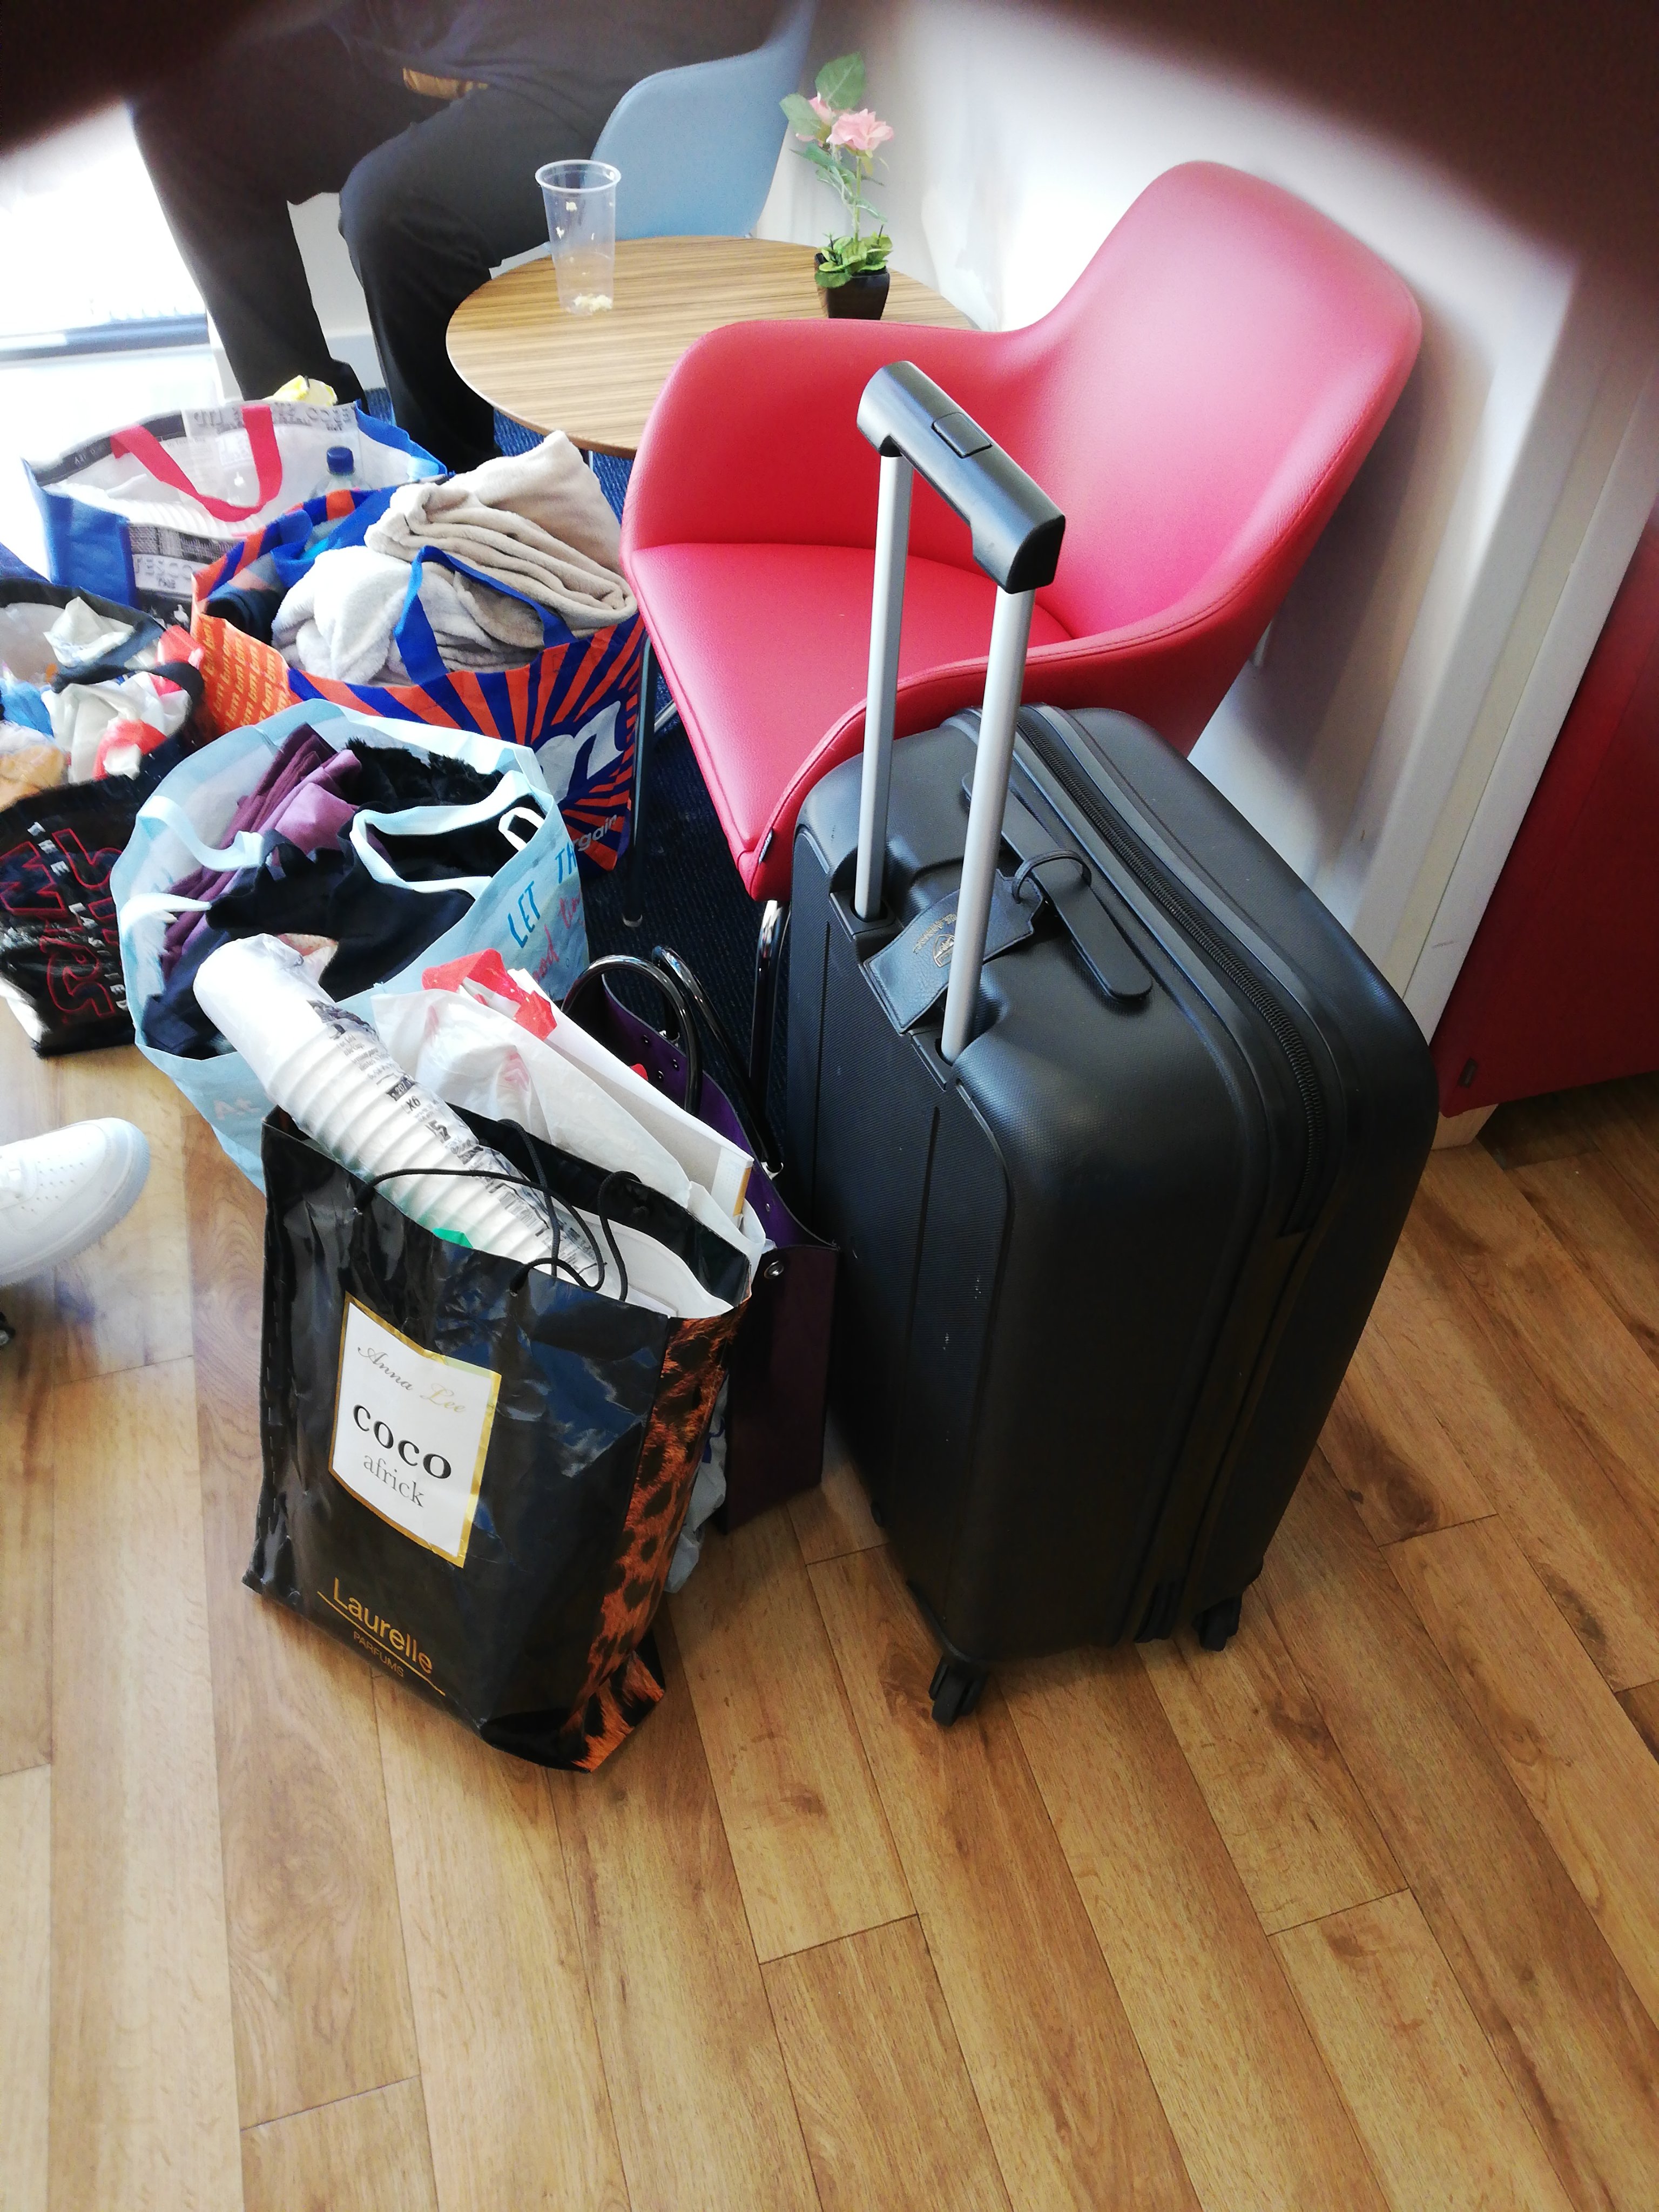 One Travelodge resident's belongings in the hotel foyer